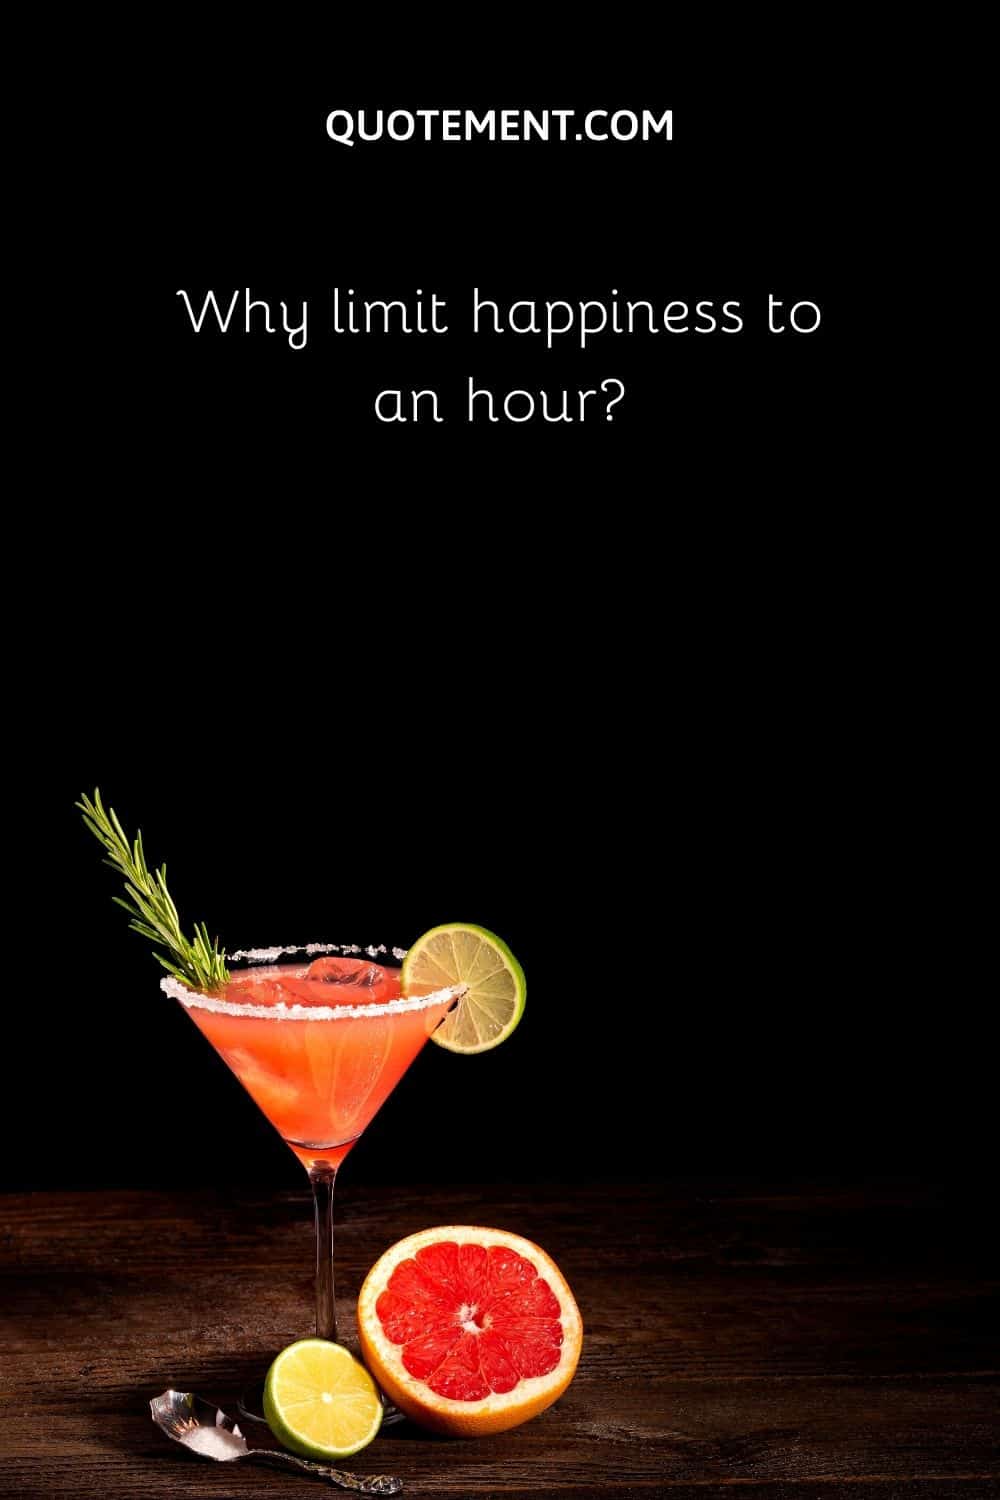 Why limit happiness to an hour